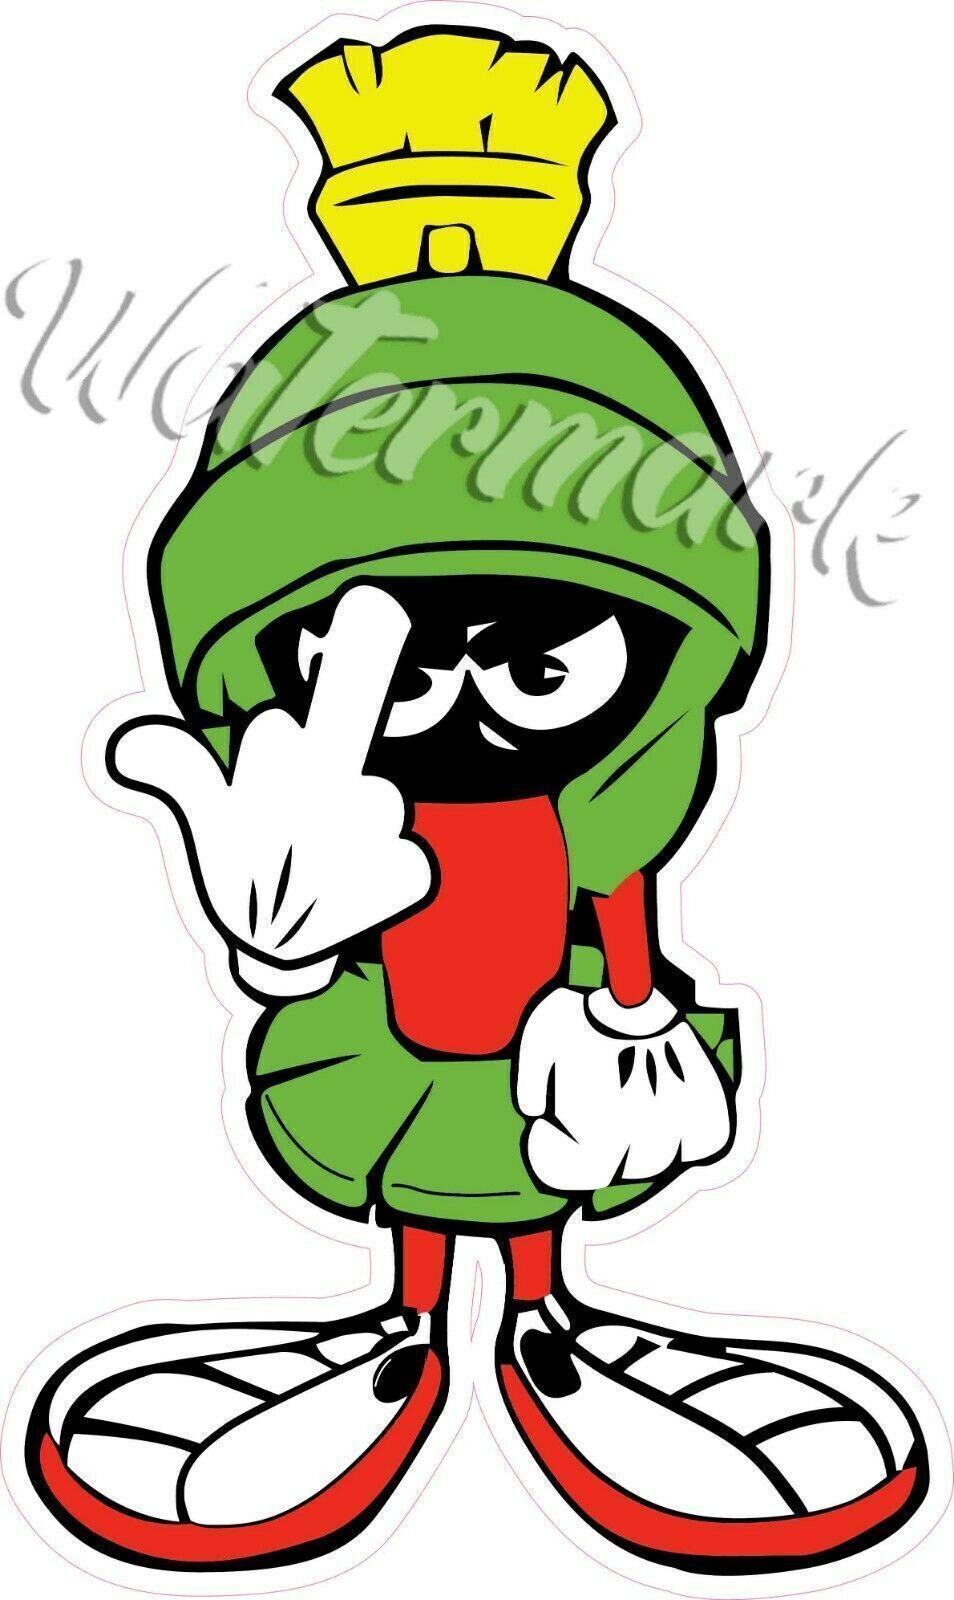 Marvin the Martian Middle Finger Sticker / Vinyl Decal |10 Sizes with TRACKING